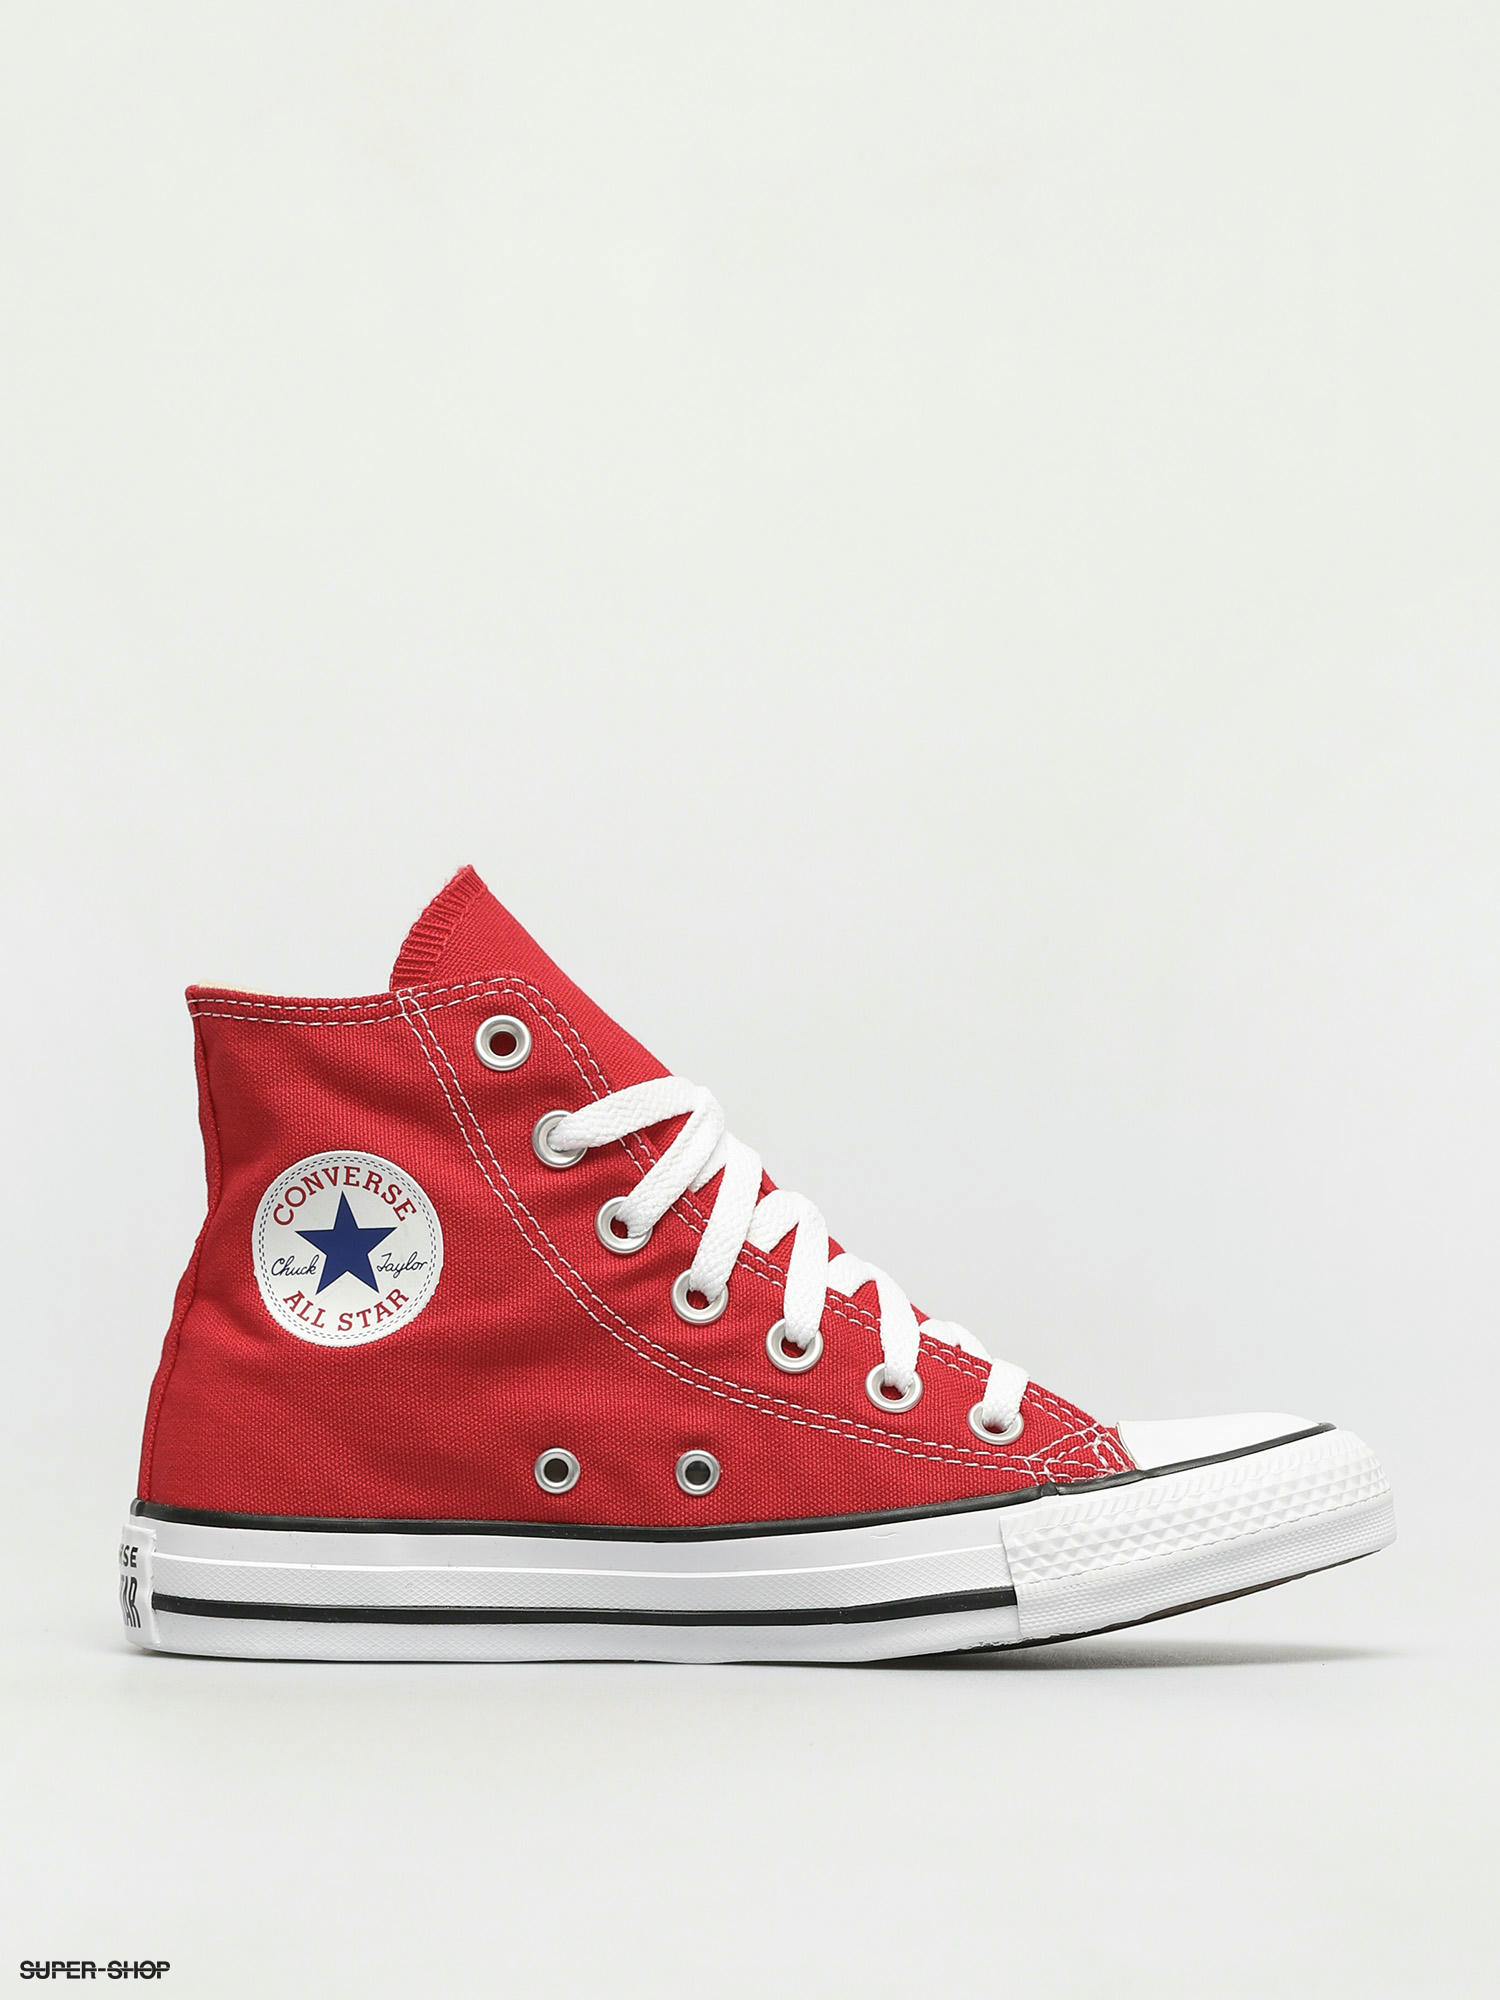 converse chuck taylor red high top